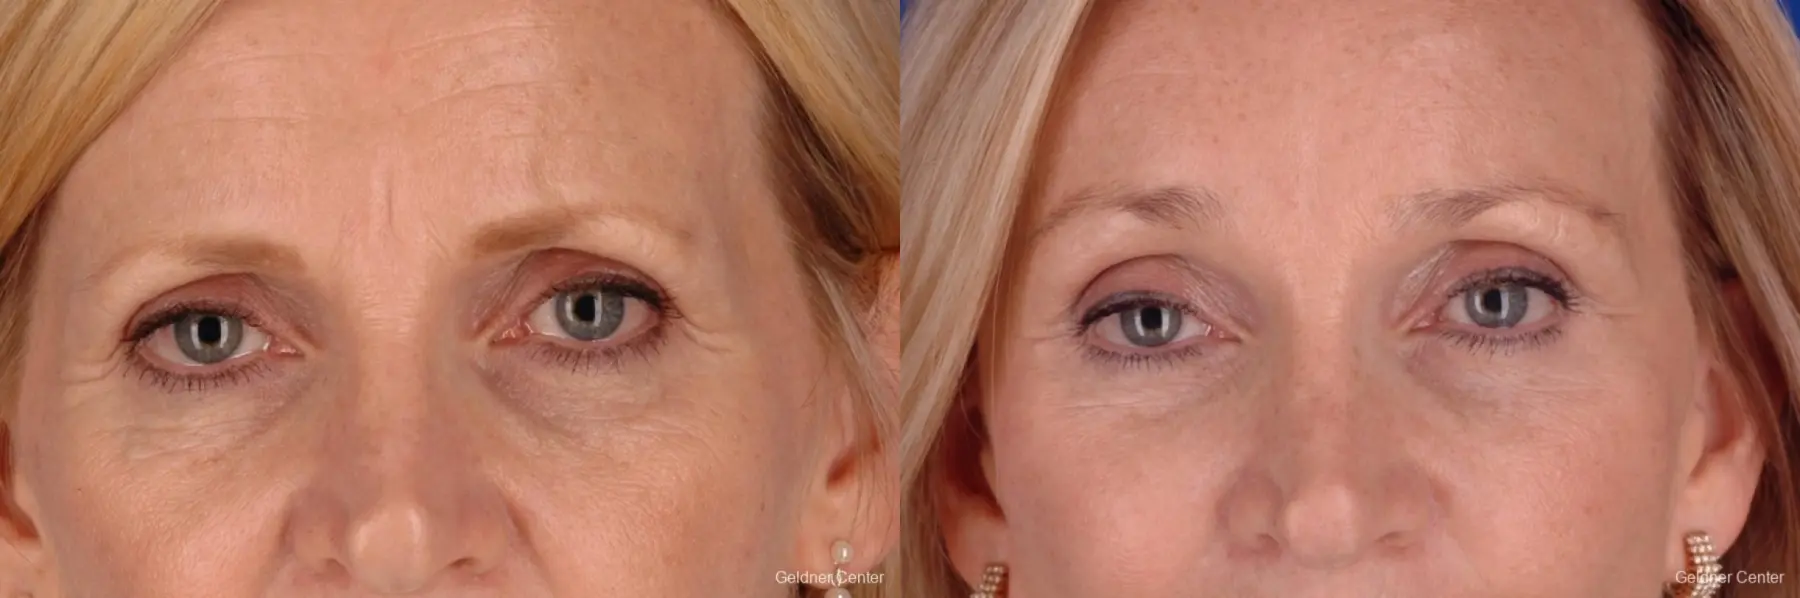 Chicago Eyelid Lift 2287 - Before and After 1